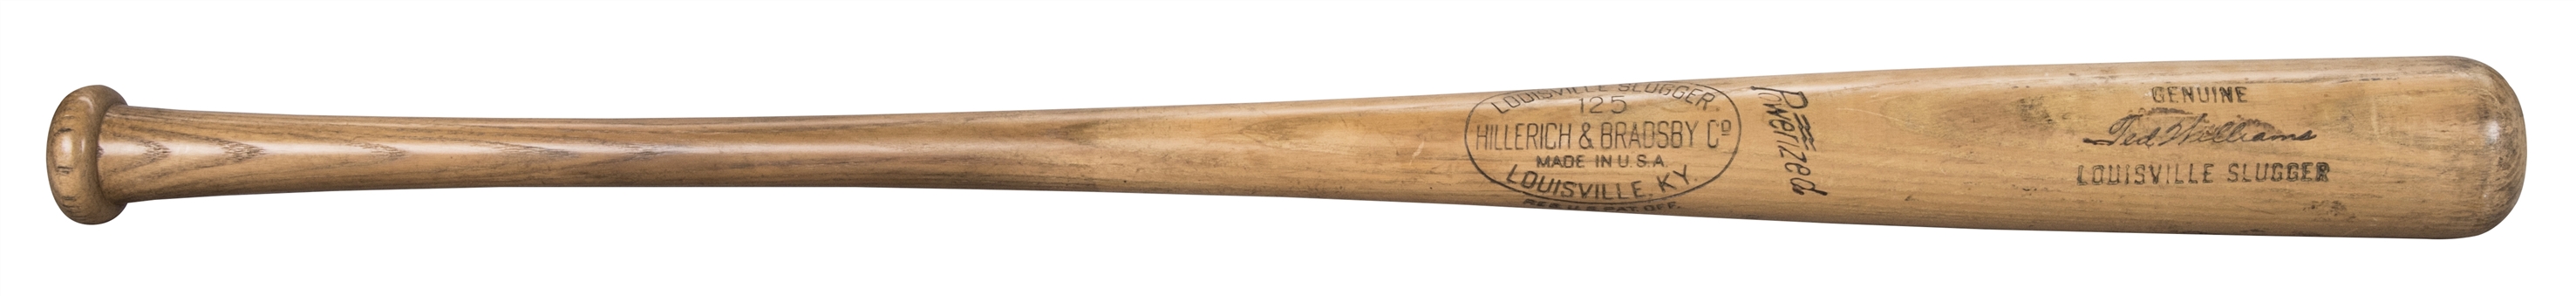 1955-59 Ted Williams Game Used Hillerich & Bradsby W183 Model Bat (PSA/DNA)